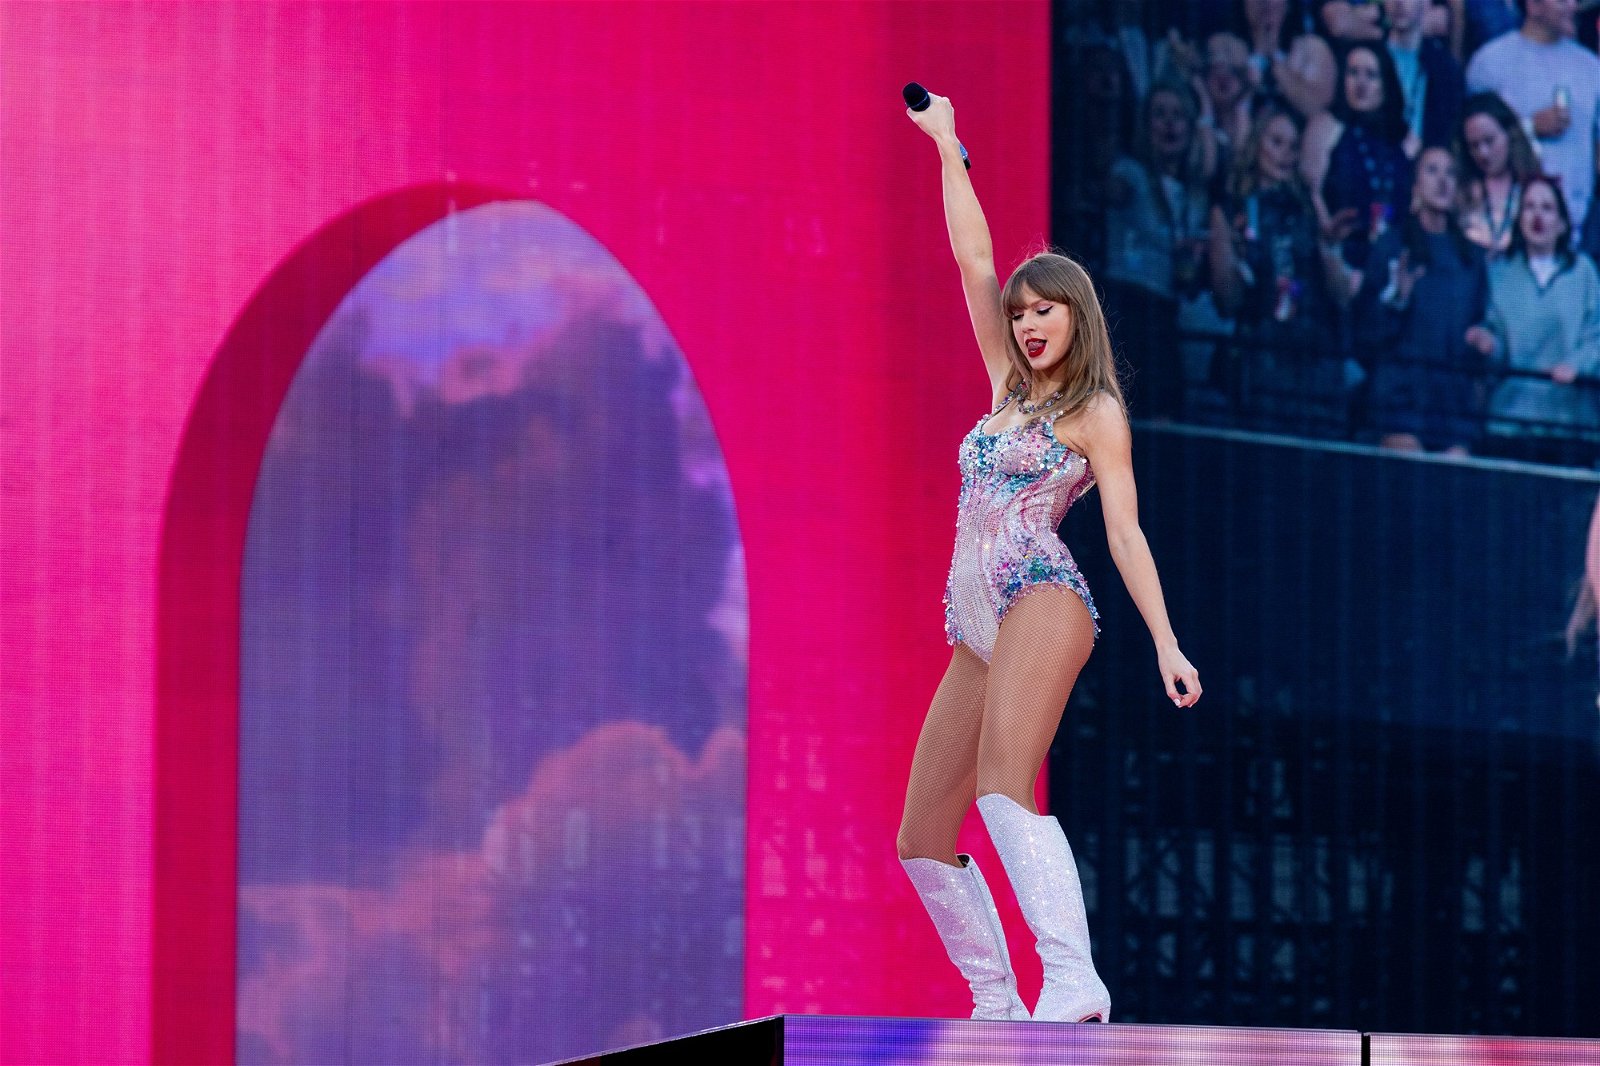 Taylor swift performing